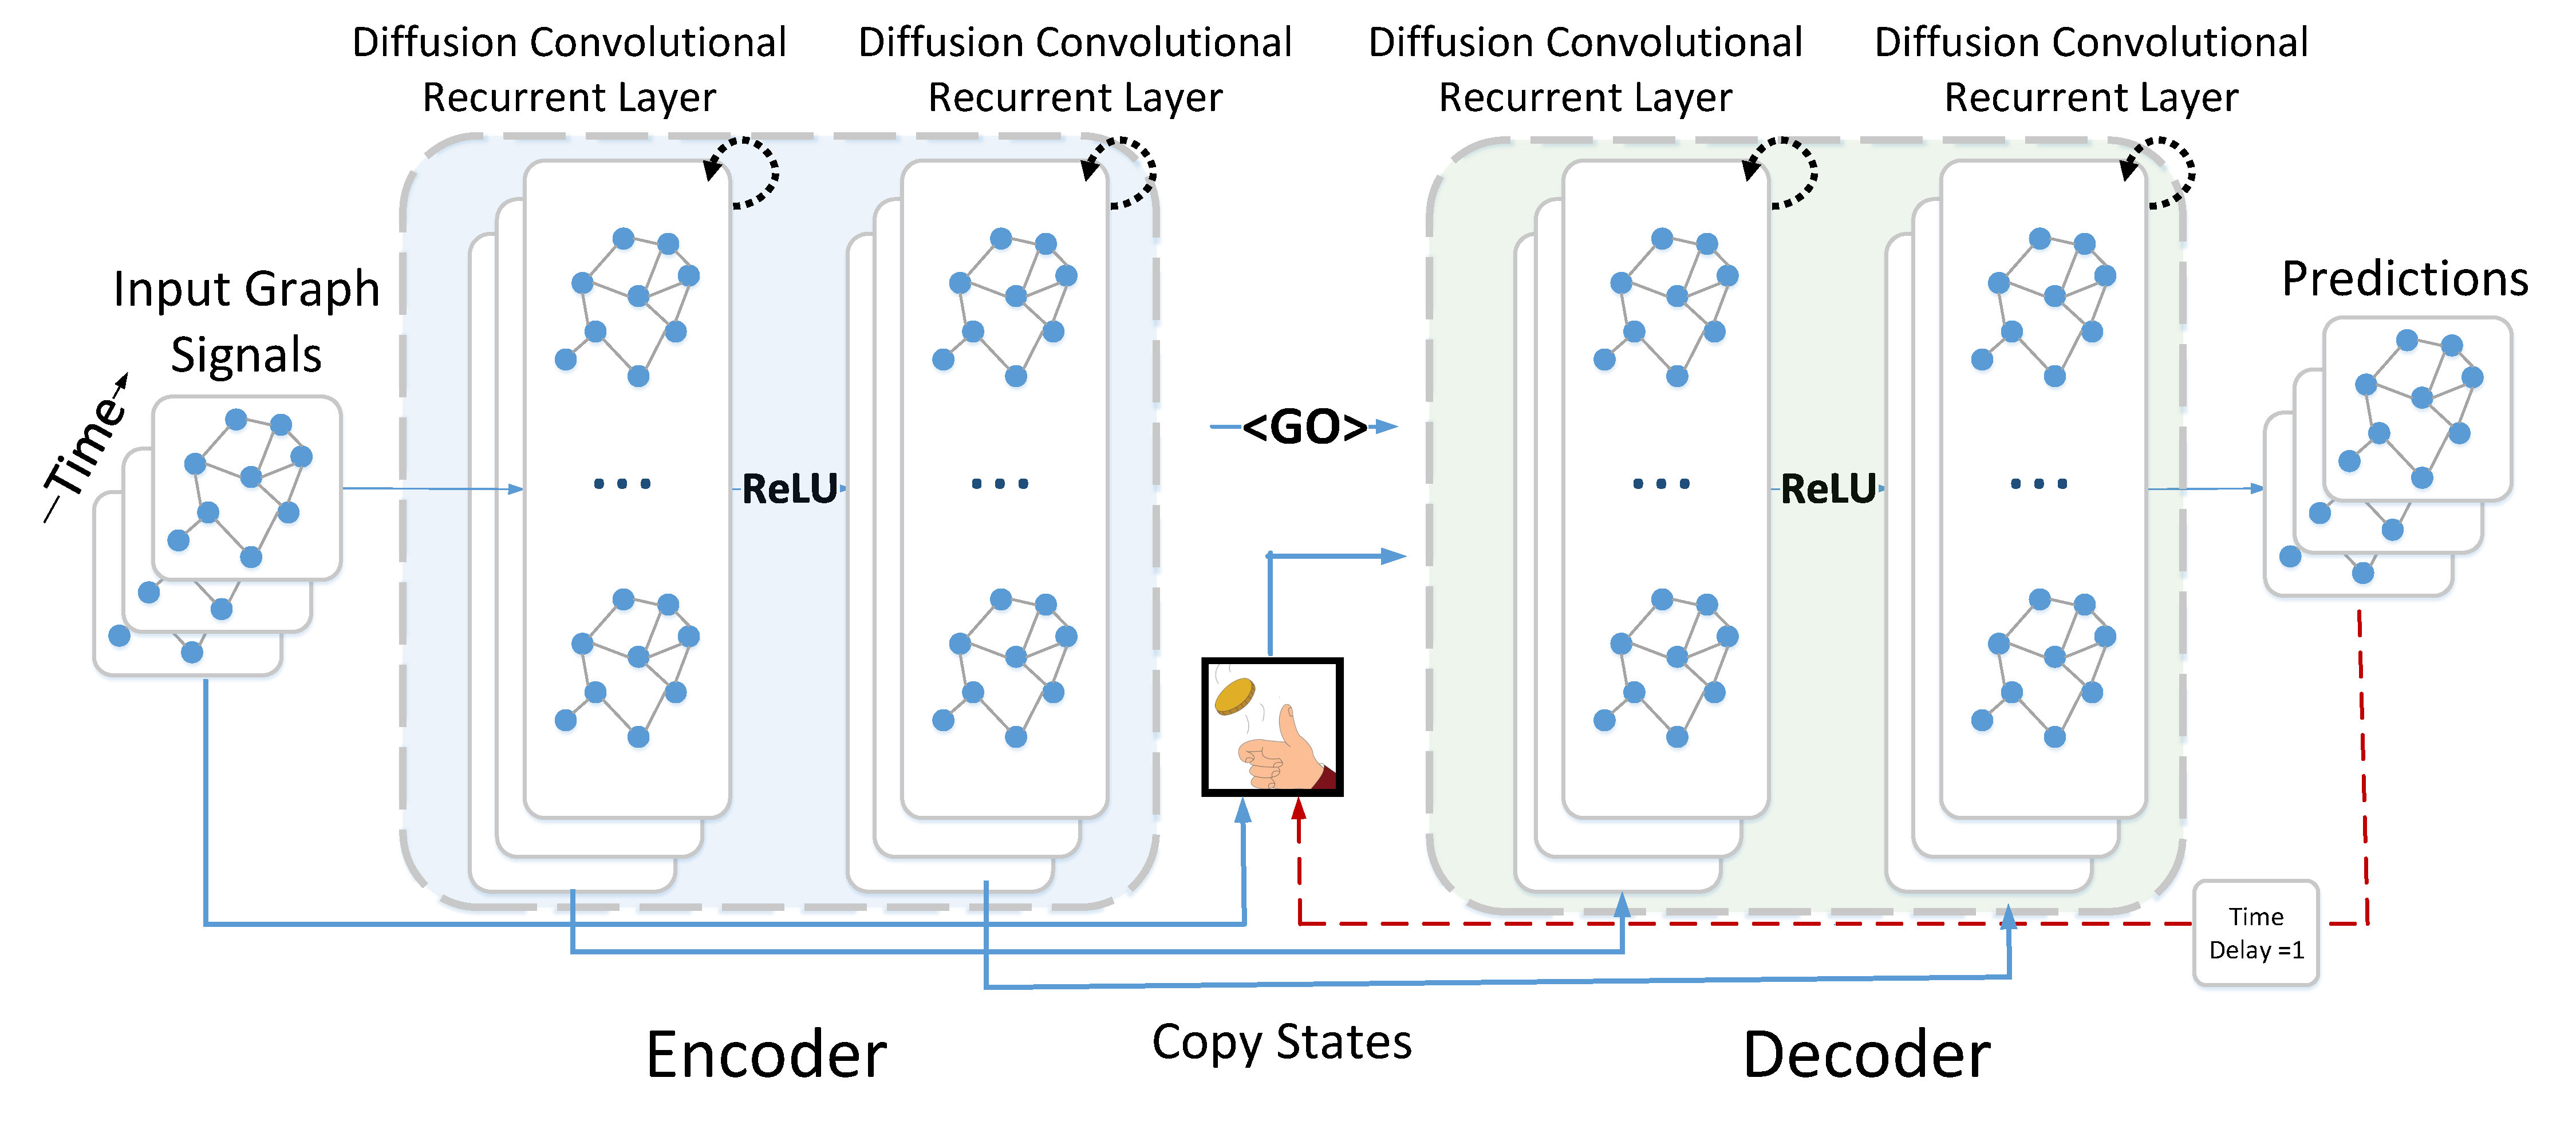 Diffusion Convolutional Recurrent Neural Network